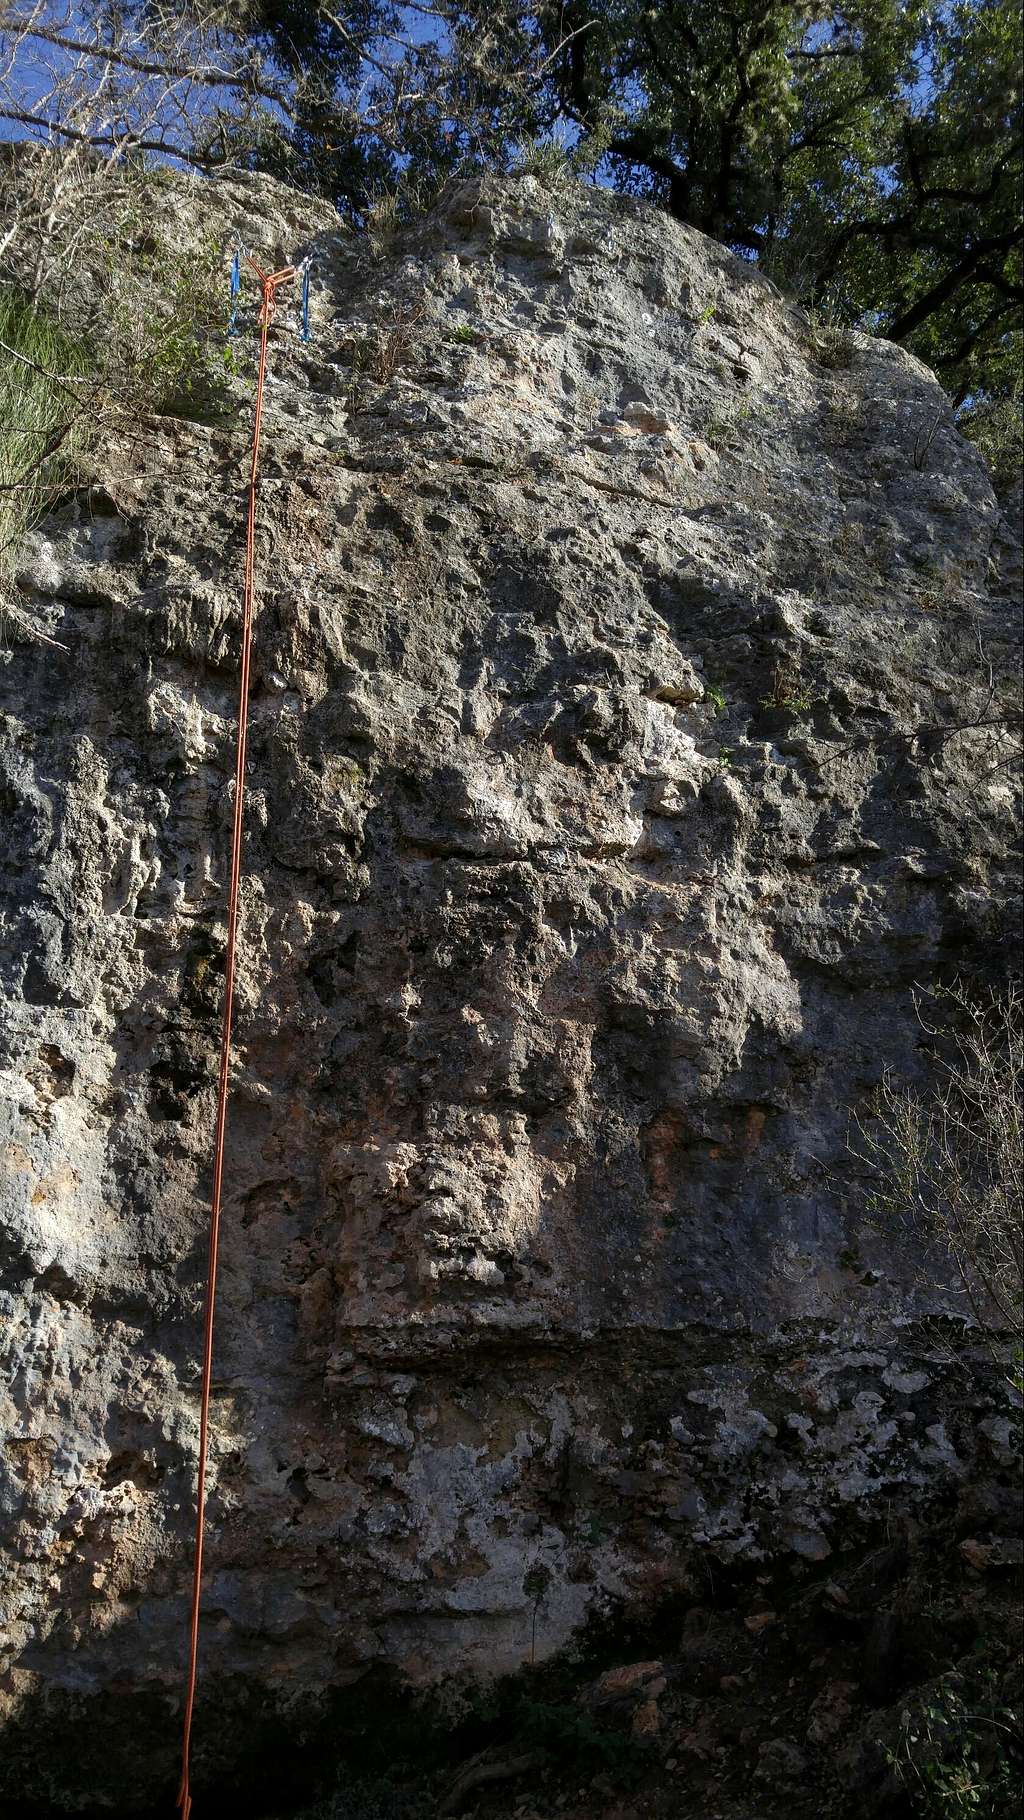 Fat Chicks Tryin' To Be Sexy (5.10a) and Hat Dance (5.9)